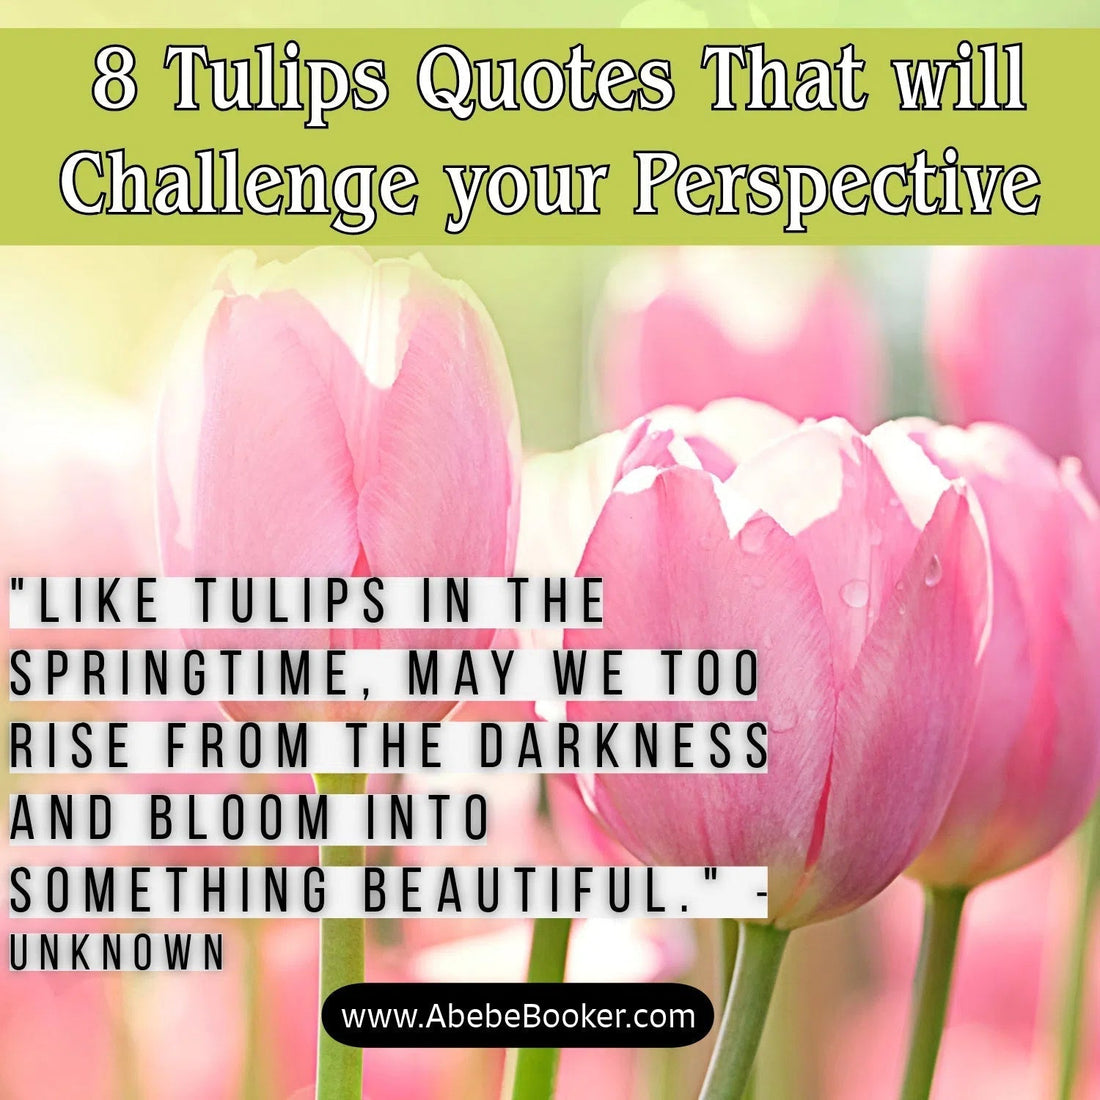 Quote about Tulips | Uplifting Quotes to Spark Joy and Growth